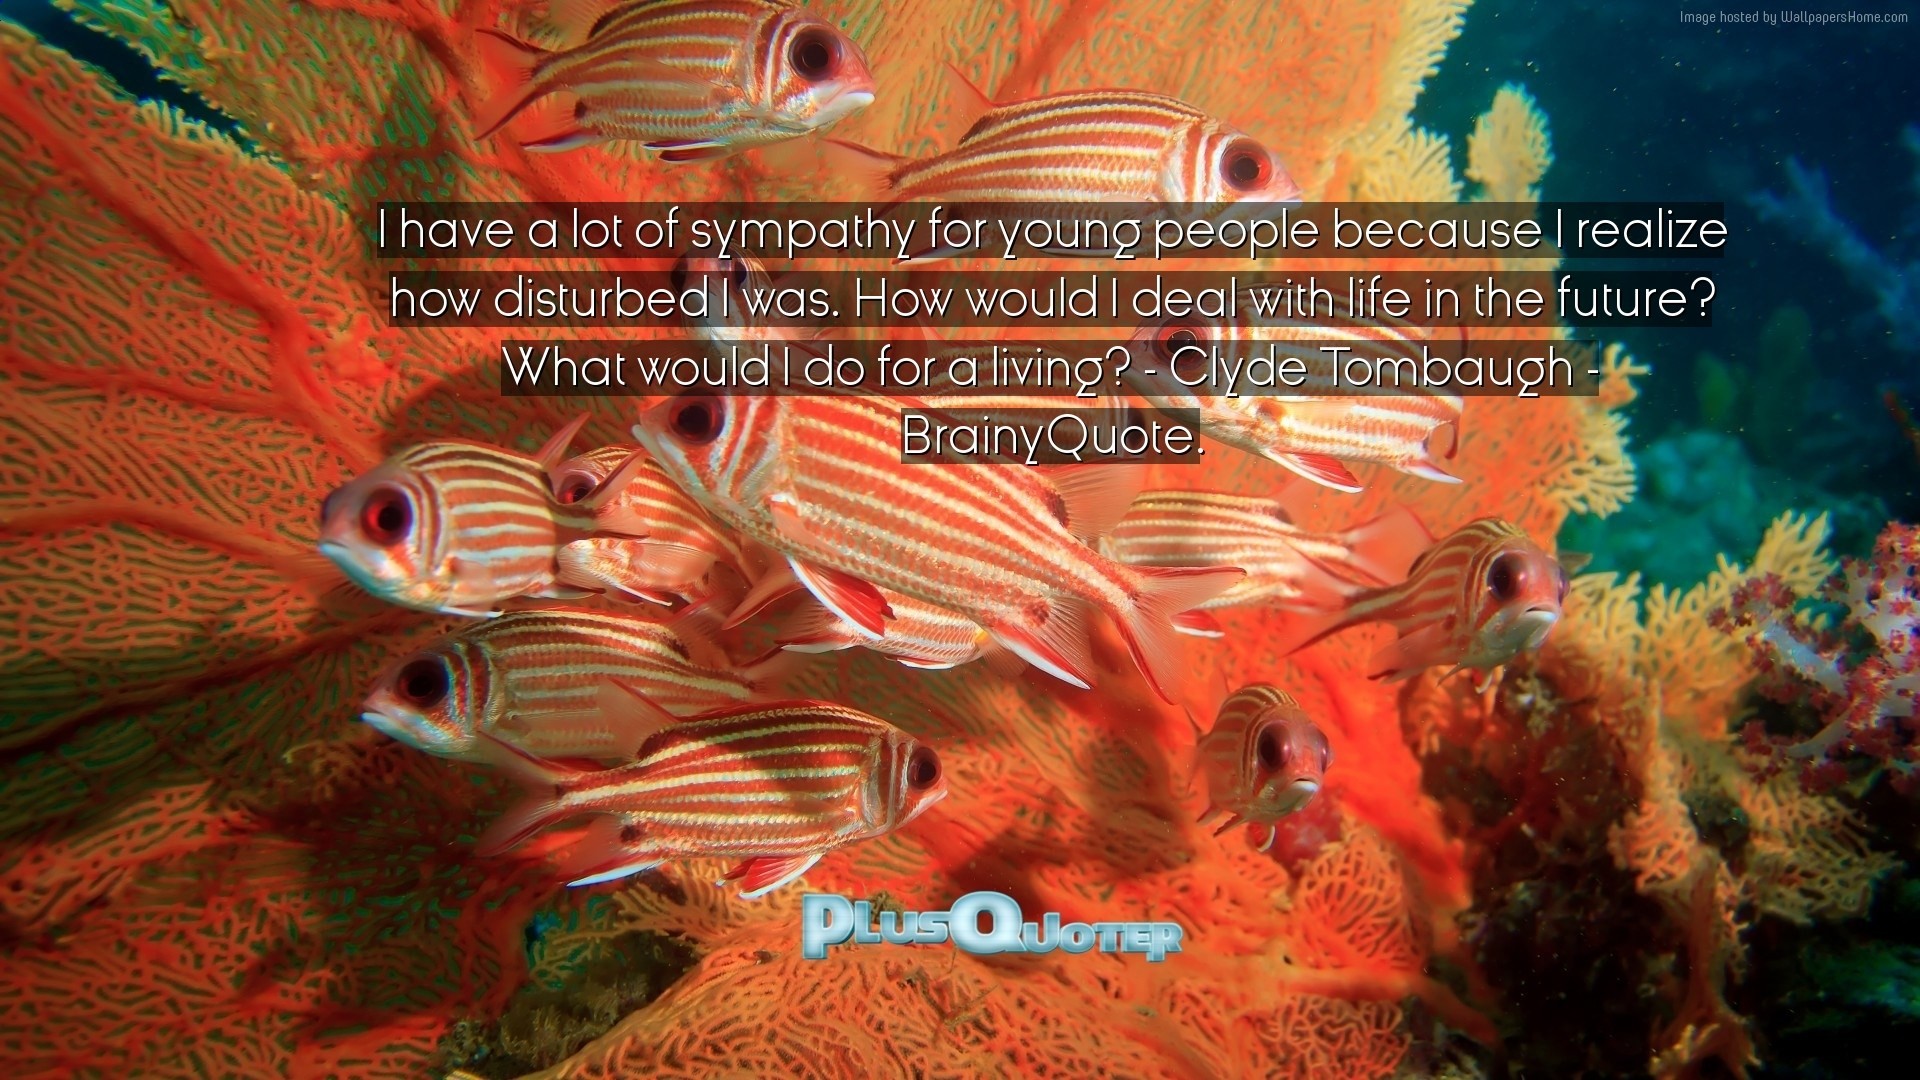 1920x1080 Download Wallpaper with inspirational Quotes- "I have a lot of sympathy for  young people